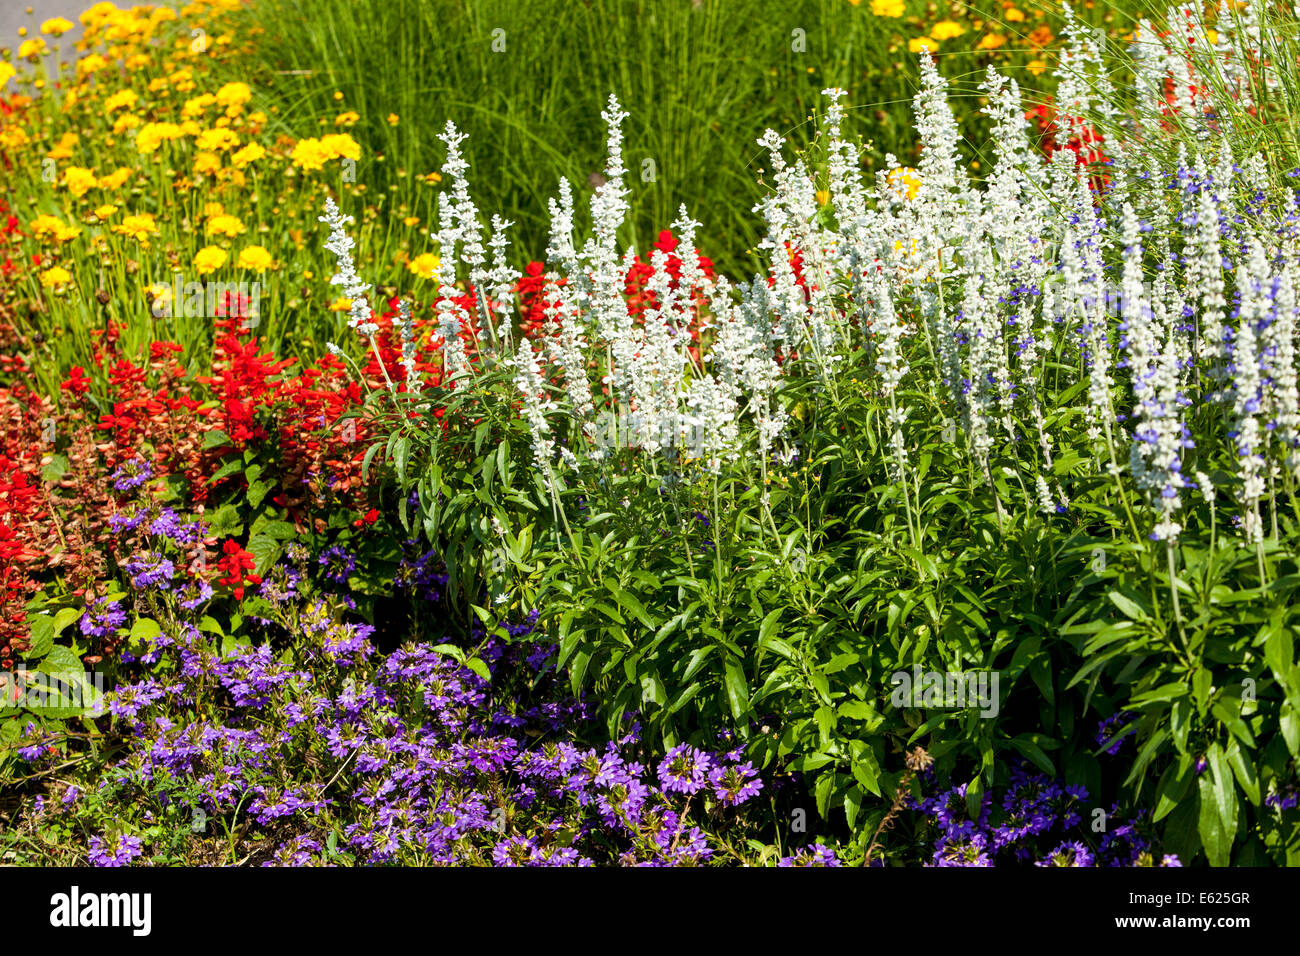 Garden flowers colorful flowerbed of annual flowers, Salvia farinacea Scaevola Stock Photo